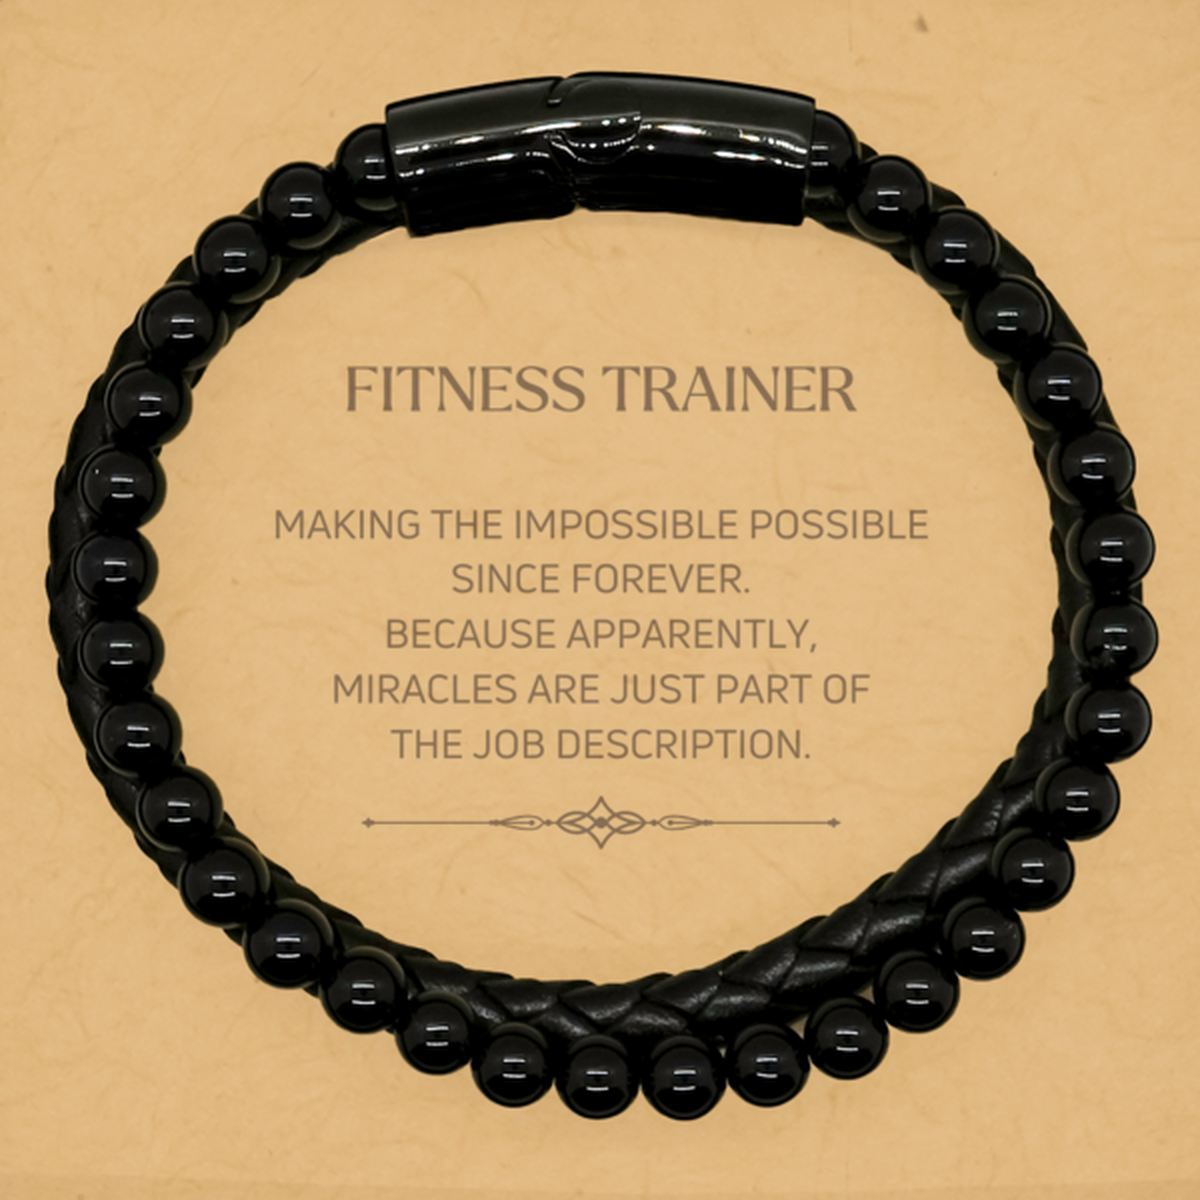 Funny Fitness Trainer Gifts, Miracles are just part of the job description, Inspirational Birthday Stone Leather Bracelets For Fitness Trainer, Men, Women, Coworkers, Friends, Boss